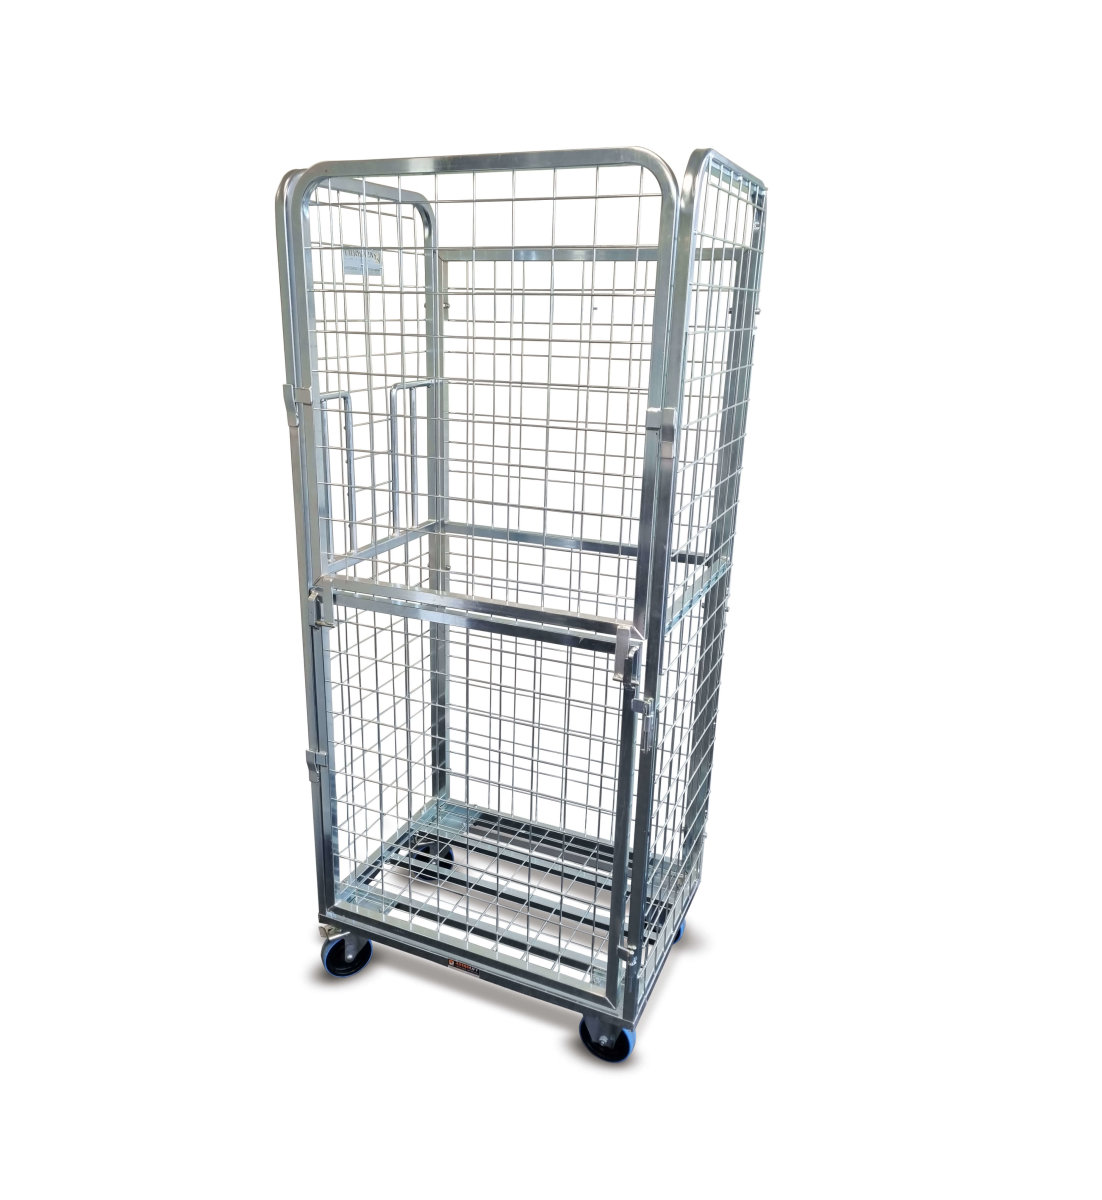 Buy Multi Purpose Cage Trolley in Cage Trolleys from Astrolift NZ